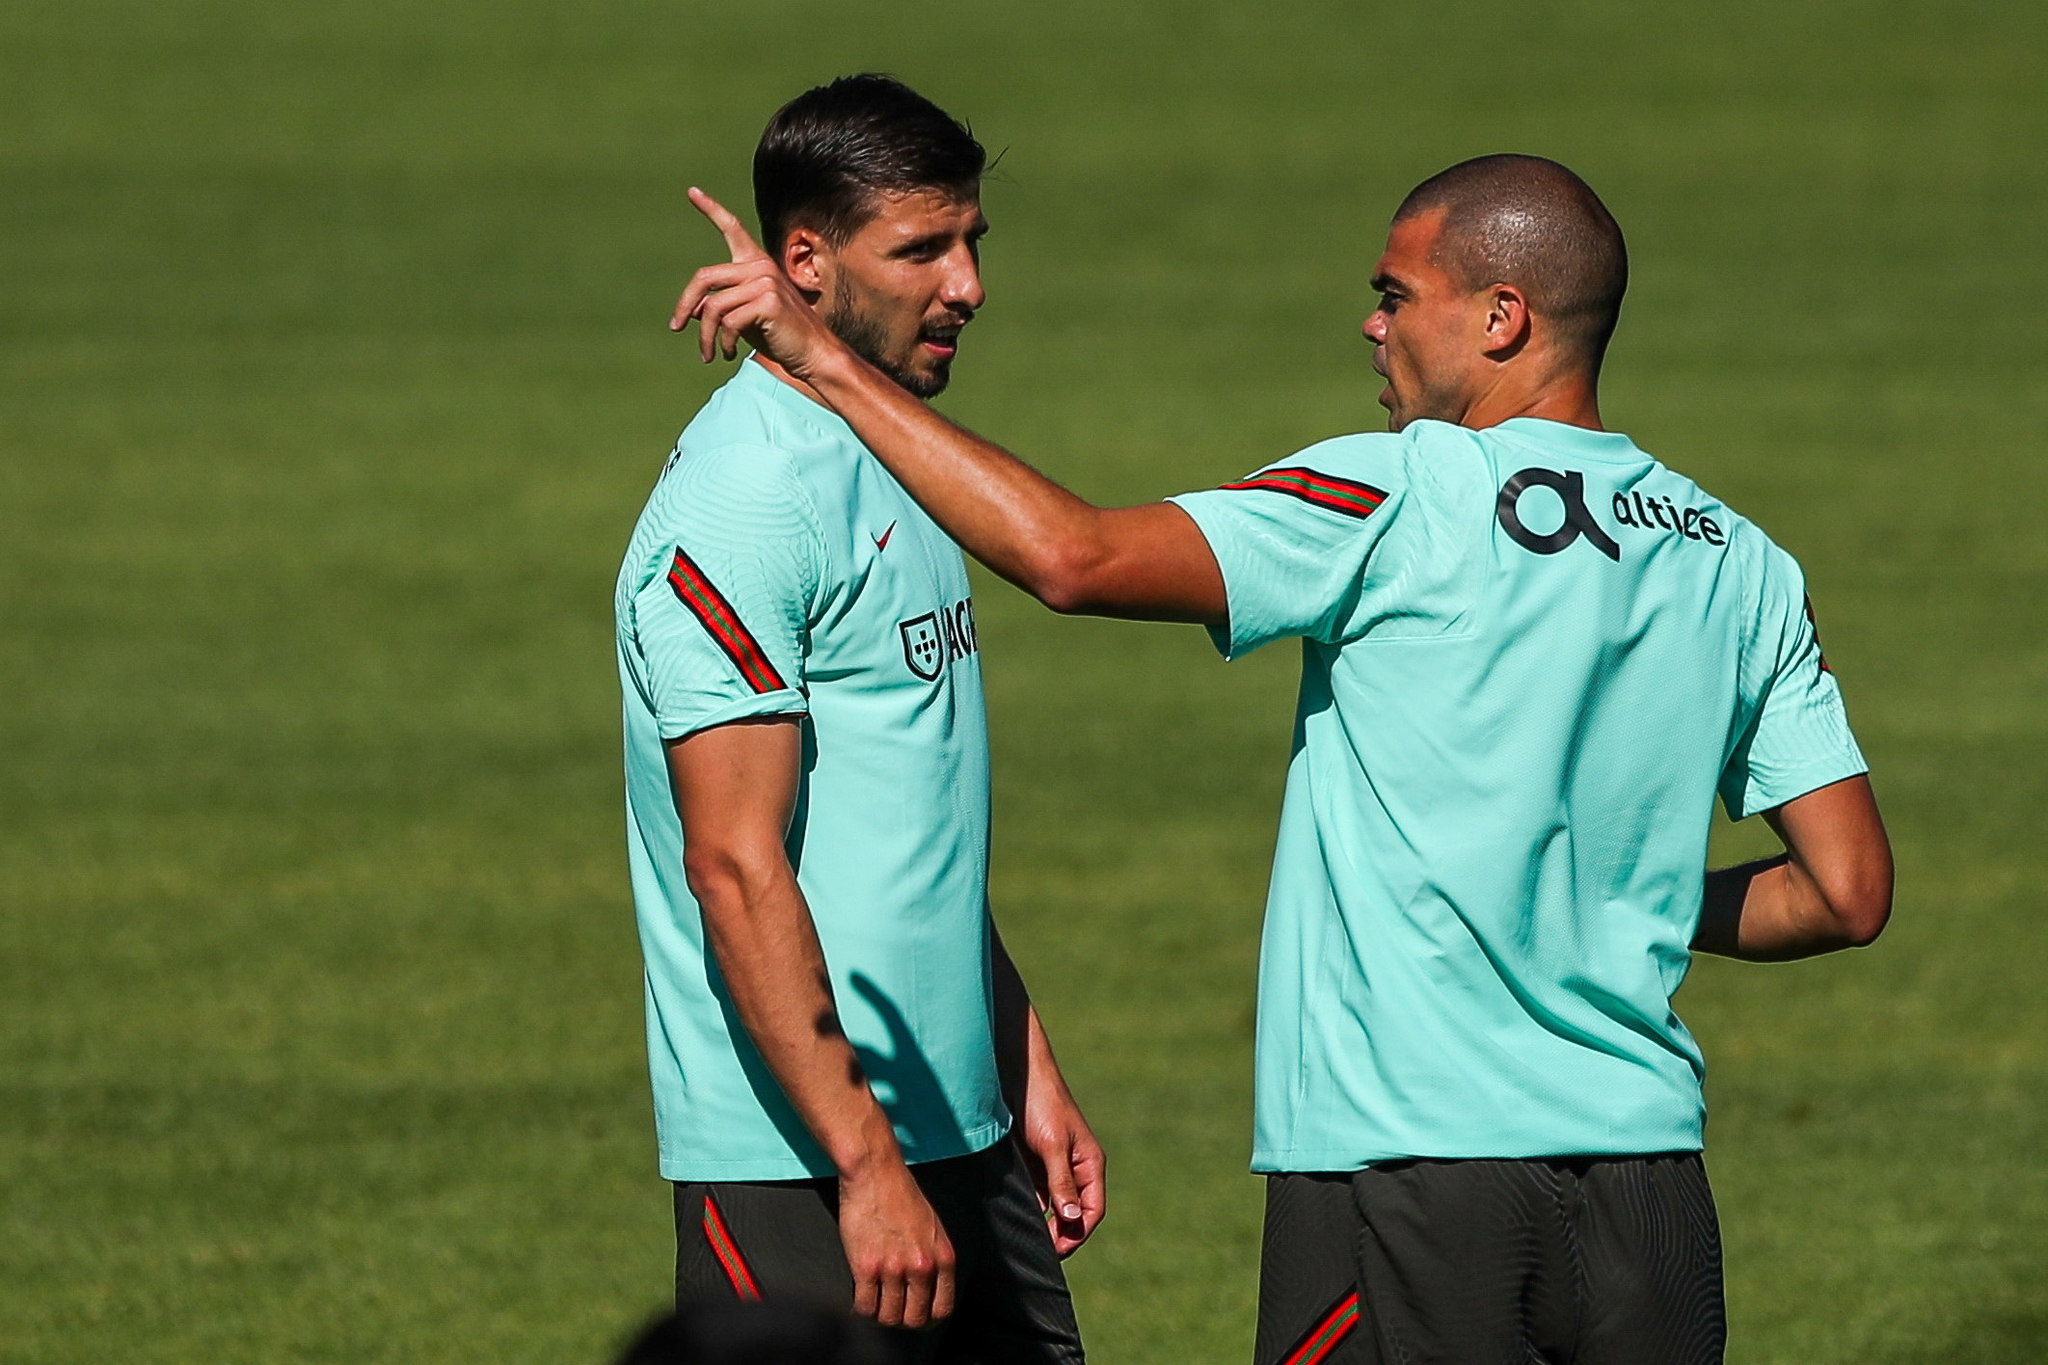 Ruben Dias and Pepe have a discussion during one of Portugal's recent training sessions.